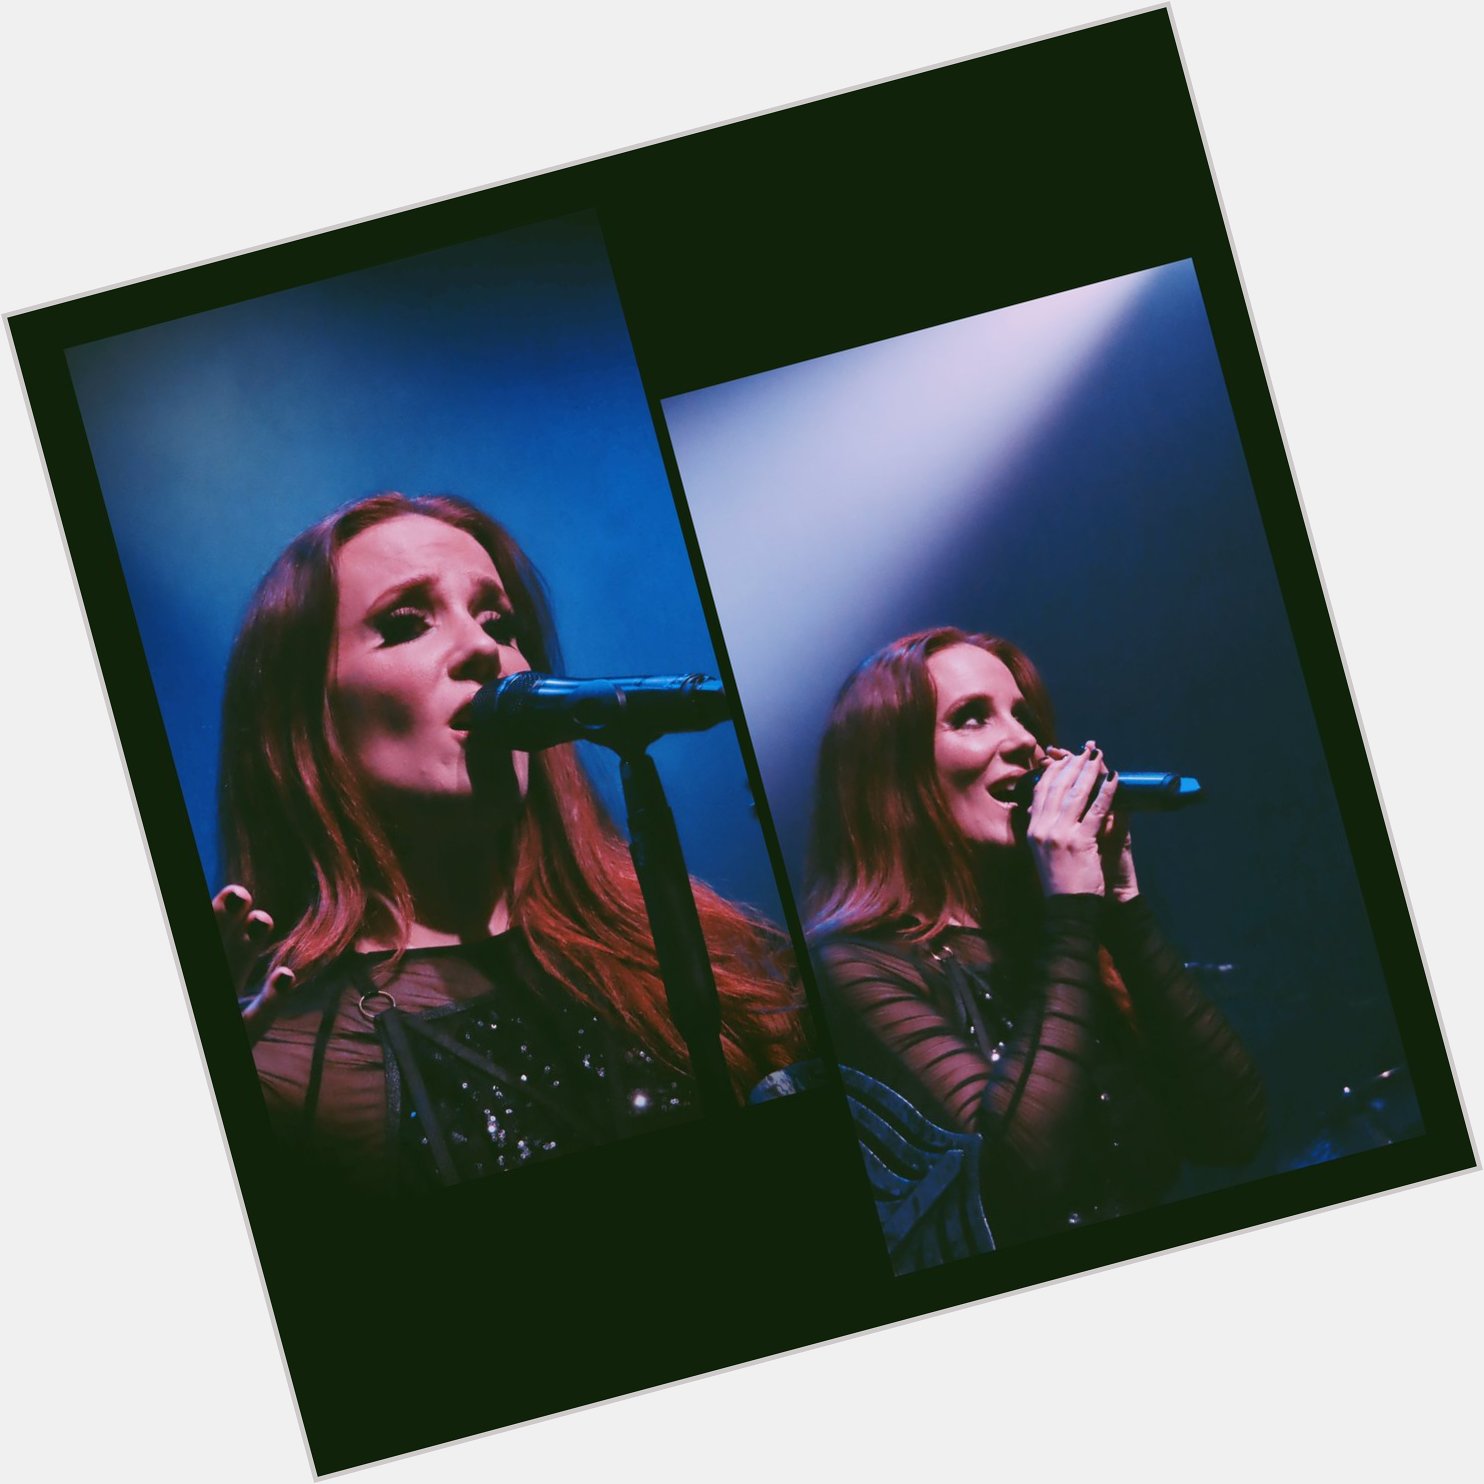 Made this for my Instagram so I ll post it here too, happy birthday again Simone Simons!!    